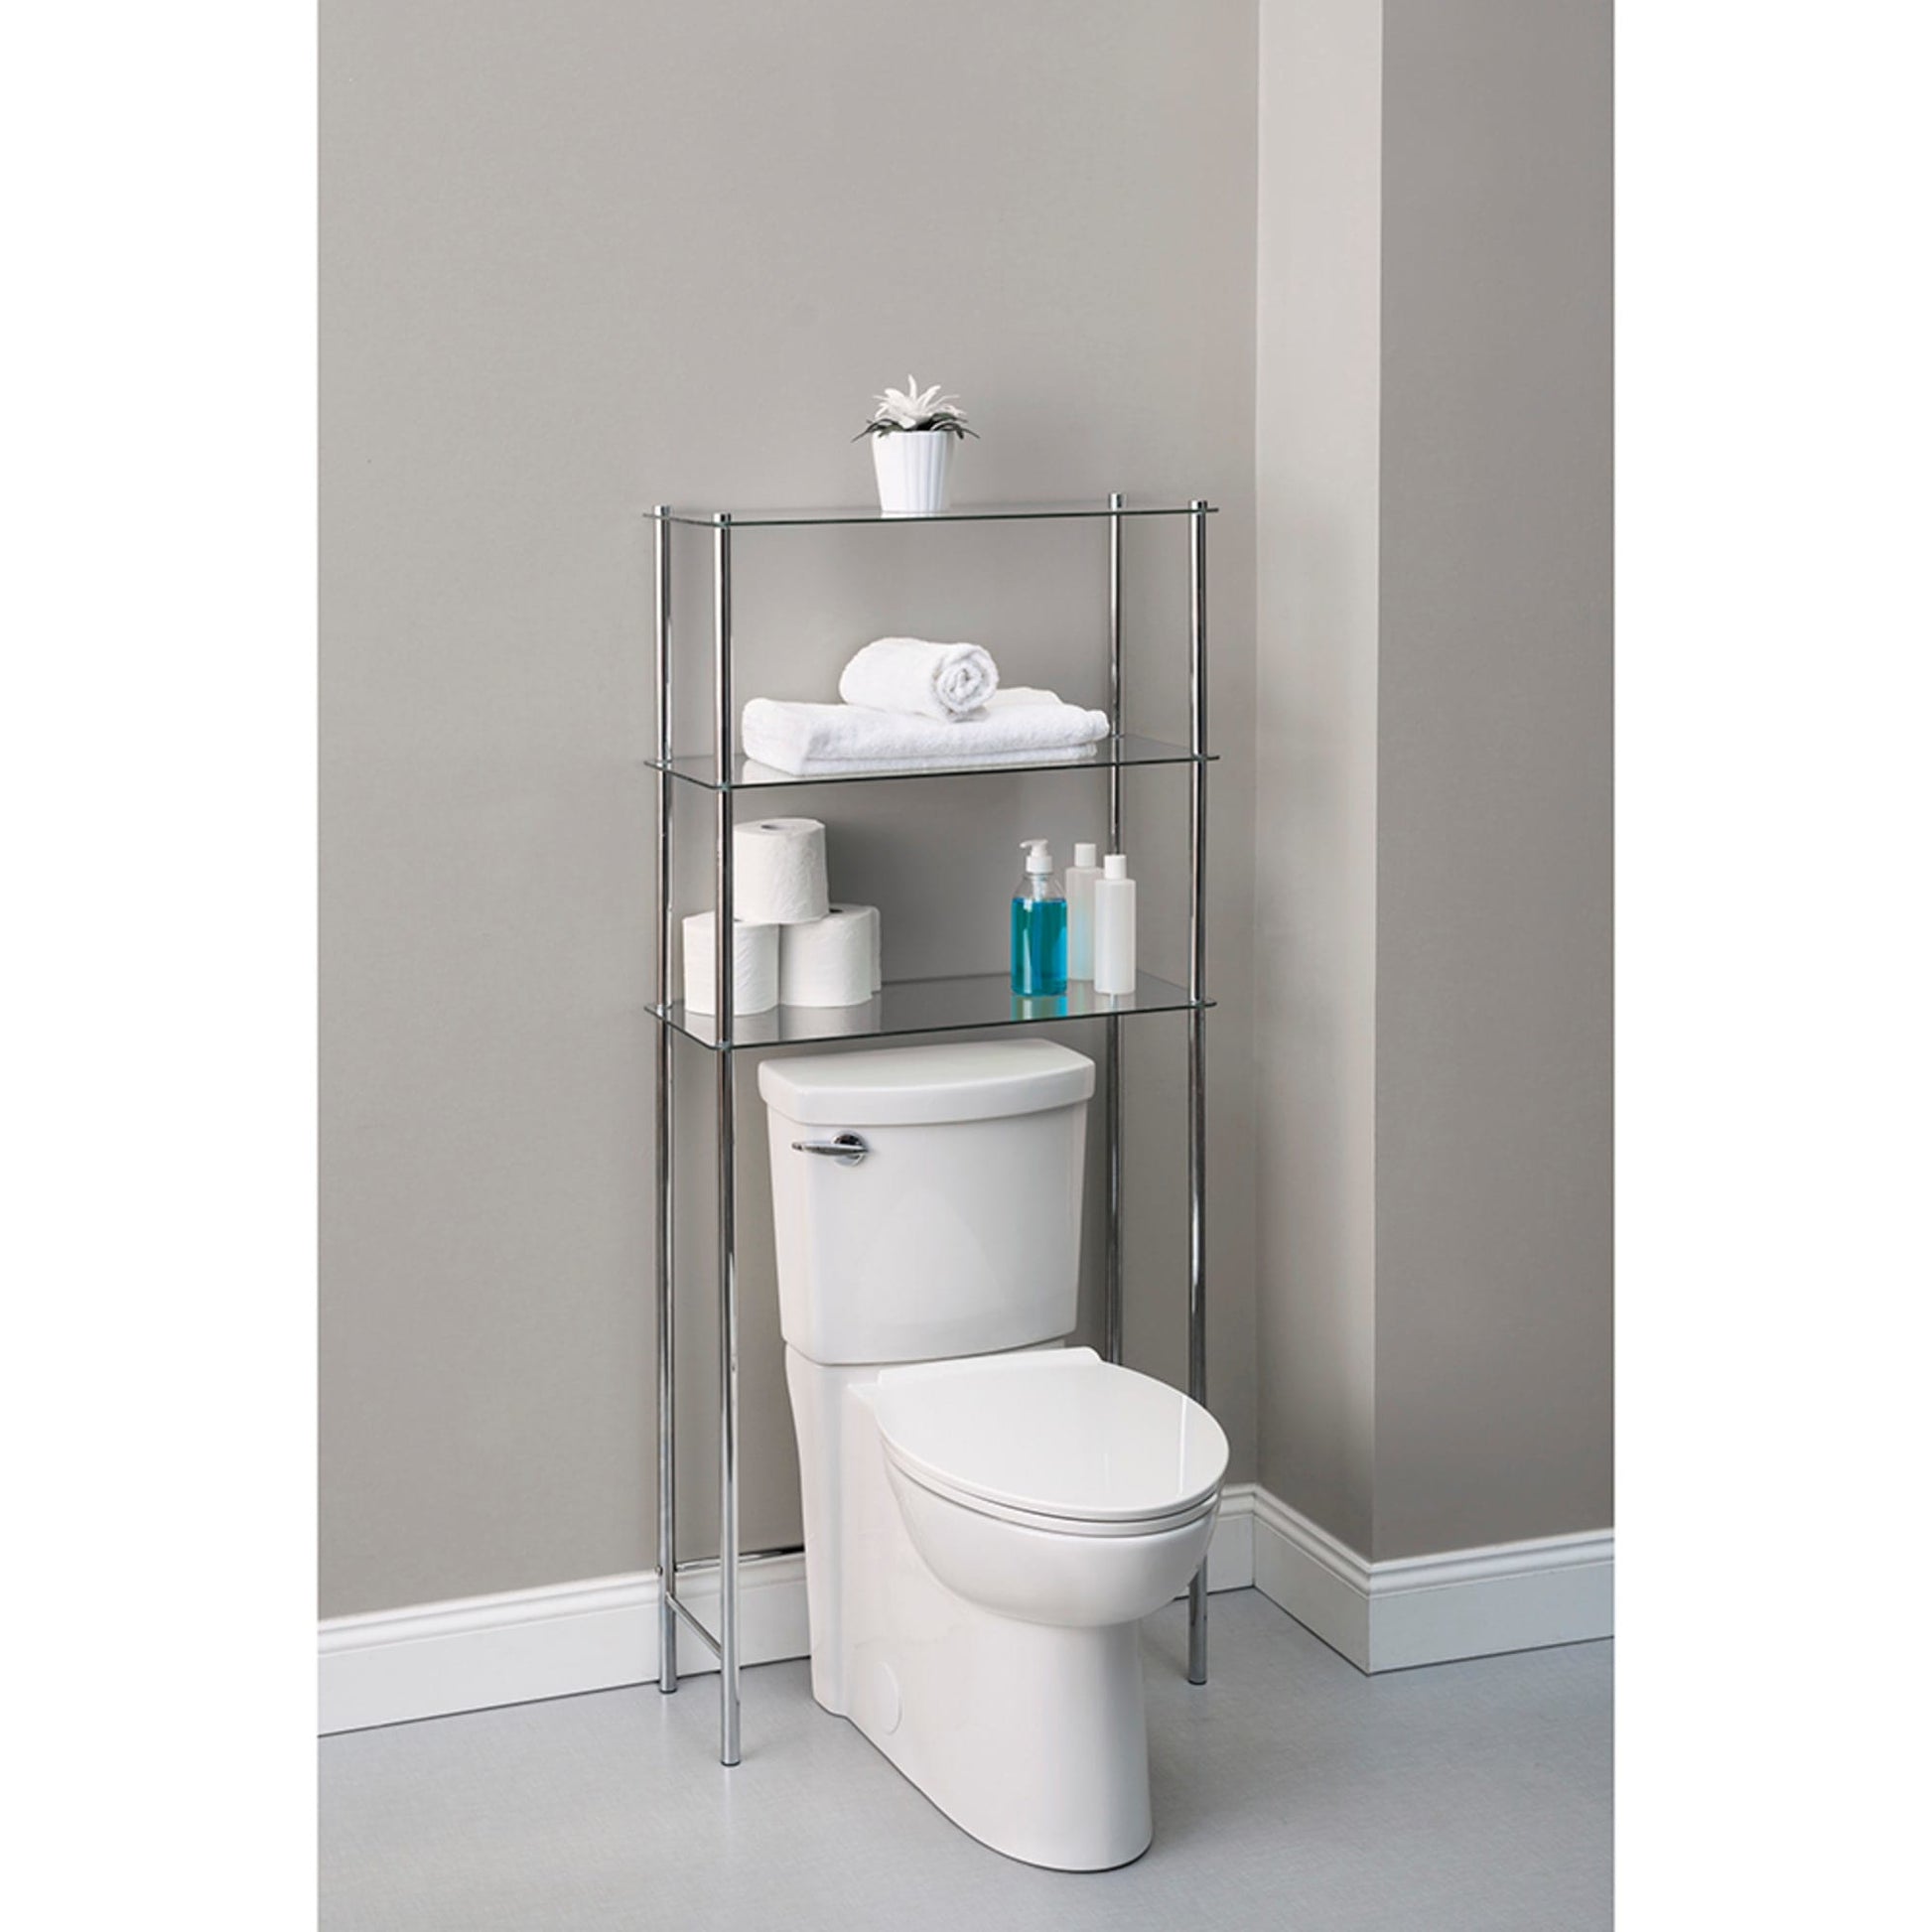 Chrome 4-Tier Over-The-Toilet Space Saver